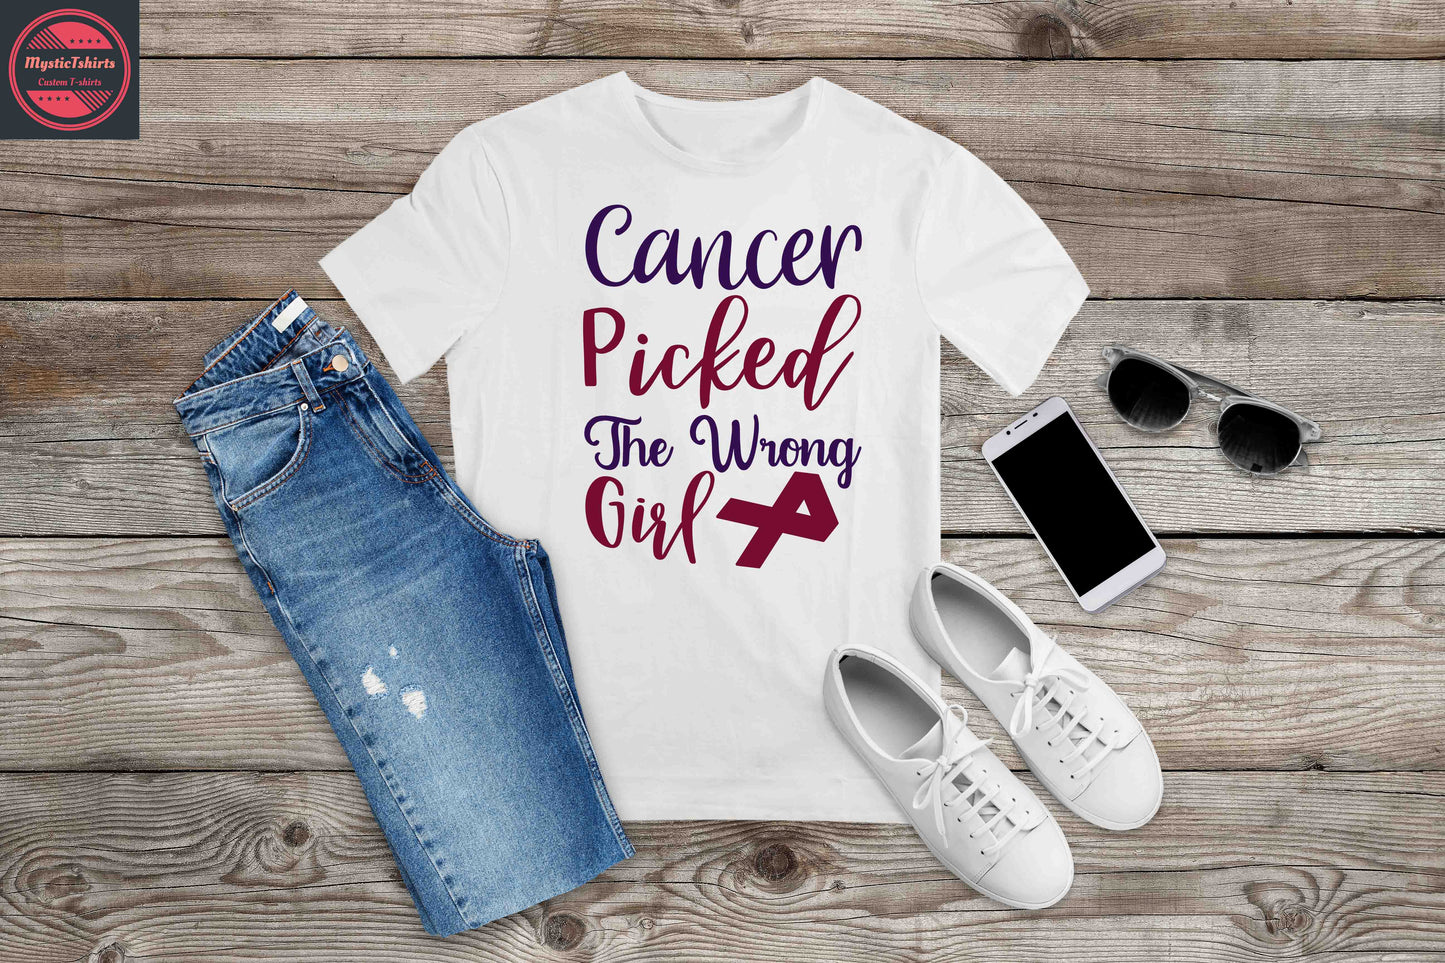 047. CANCER PICKED THE WRONG GIRL,  Cancer Awareness Custom Made Shirt, Personalized T-Shirt, Custom Text, Make Your Own Shirt, Custom Tee